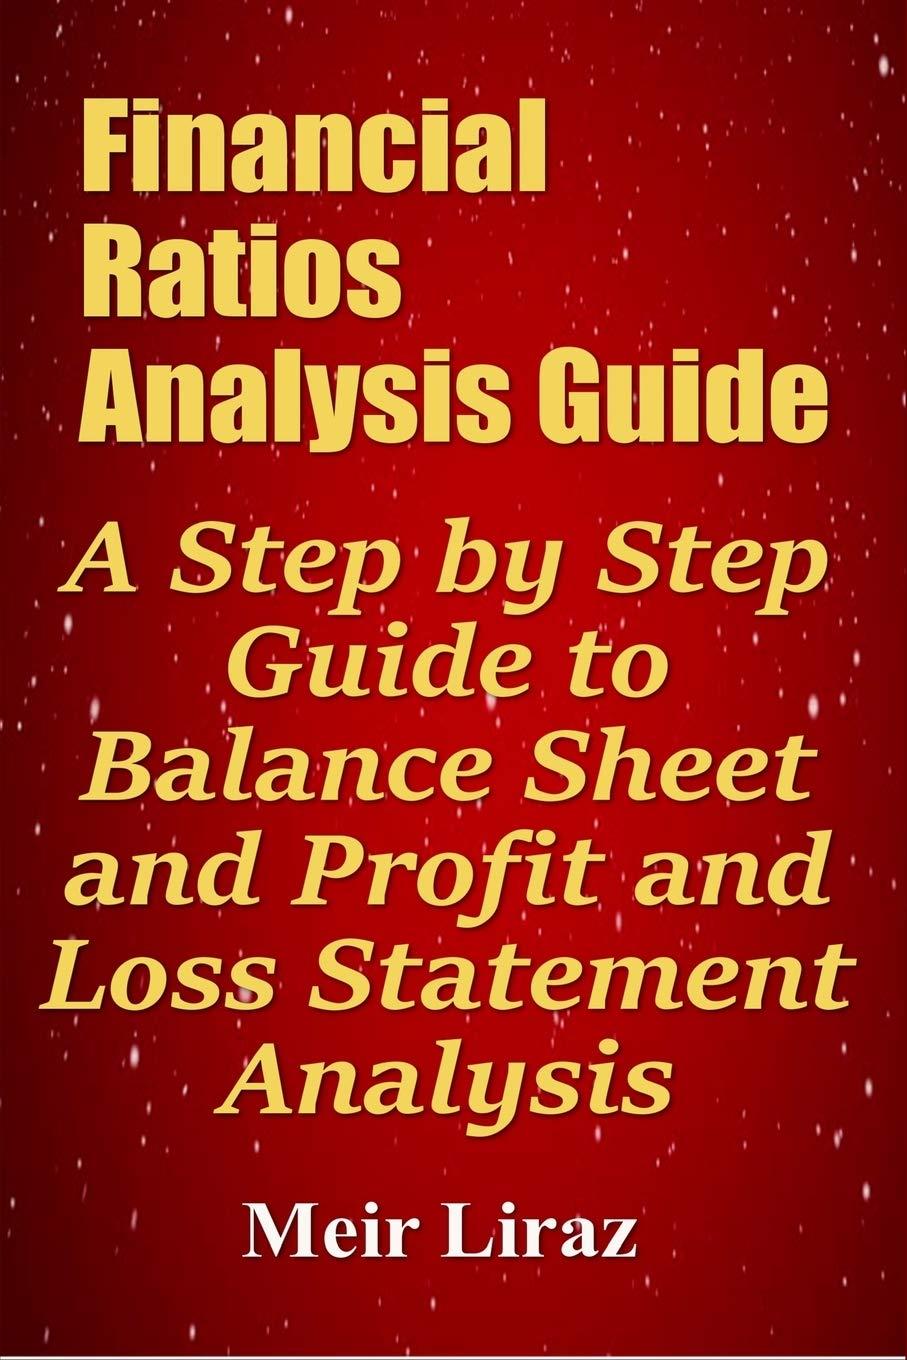 financial ratios analysis guide a step by step guide to balance sheet and profit and loss statement analysis